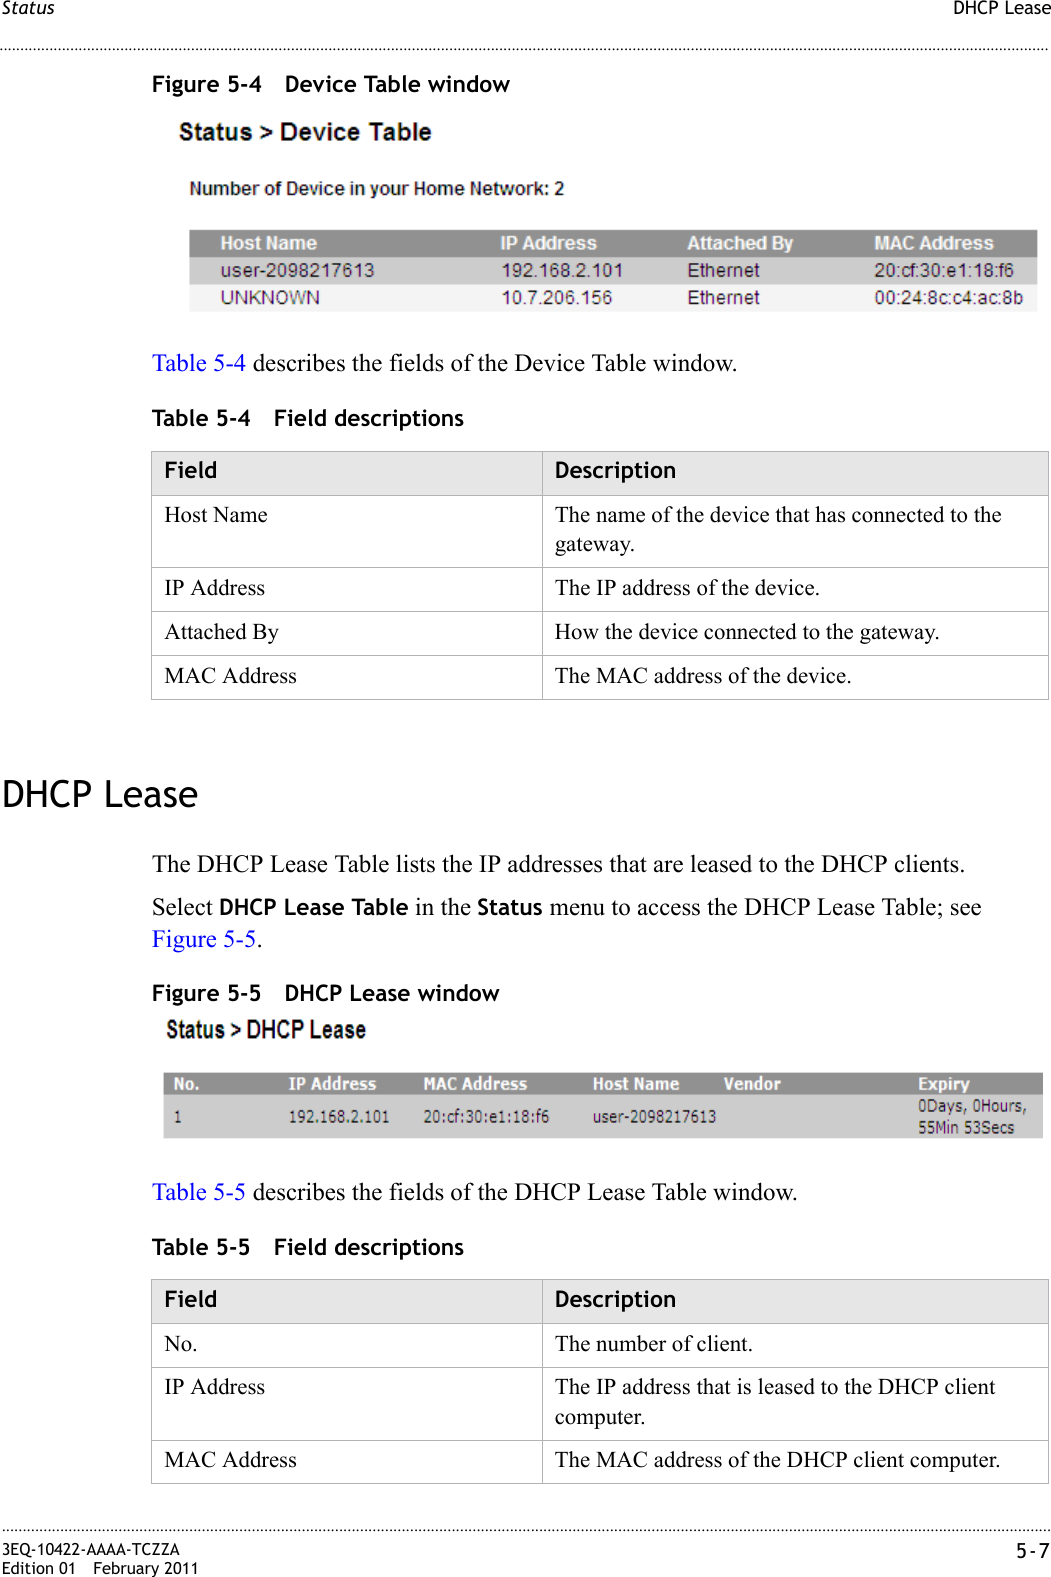 DHCP LeaseStatus............................................................................................................................................................................................................................................................3EQ-10422-AAAA-TCZZAEdition 01 February 2011 5-7............................................................................................................................................................................................................................................................Figure 5-4 Device Table windowTable 5-4 describes the fields of the Device Table window.Table 5-4 Field descriptionsDHCP LeaseThe DHCP Lease Table lists the IP addresses that are leased to the DHCP clients.Select DHCP Lease Table in the Status menu to access the DHCP Lease Table; see Figure 5-5.Figure 5-5 DHCP Lease windowTable 5-5 describes the fields of the DHCP Lease Table window.Table 5-5 Field descriptionsField DescriptionHost Name The name of the device that has connected to the gateway.IP Address The IP address of the device.Attached By How the device connected to the gateway.MAC Address The MAC address of the device.Field DescriptionNo. The number of client.IP Address The IP address that is leased to the DHCP client computer.MAC Address The MAC address of the DHCP client computer.